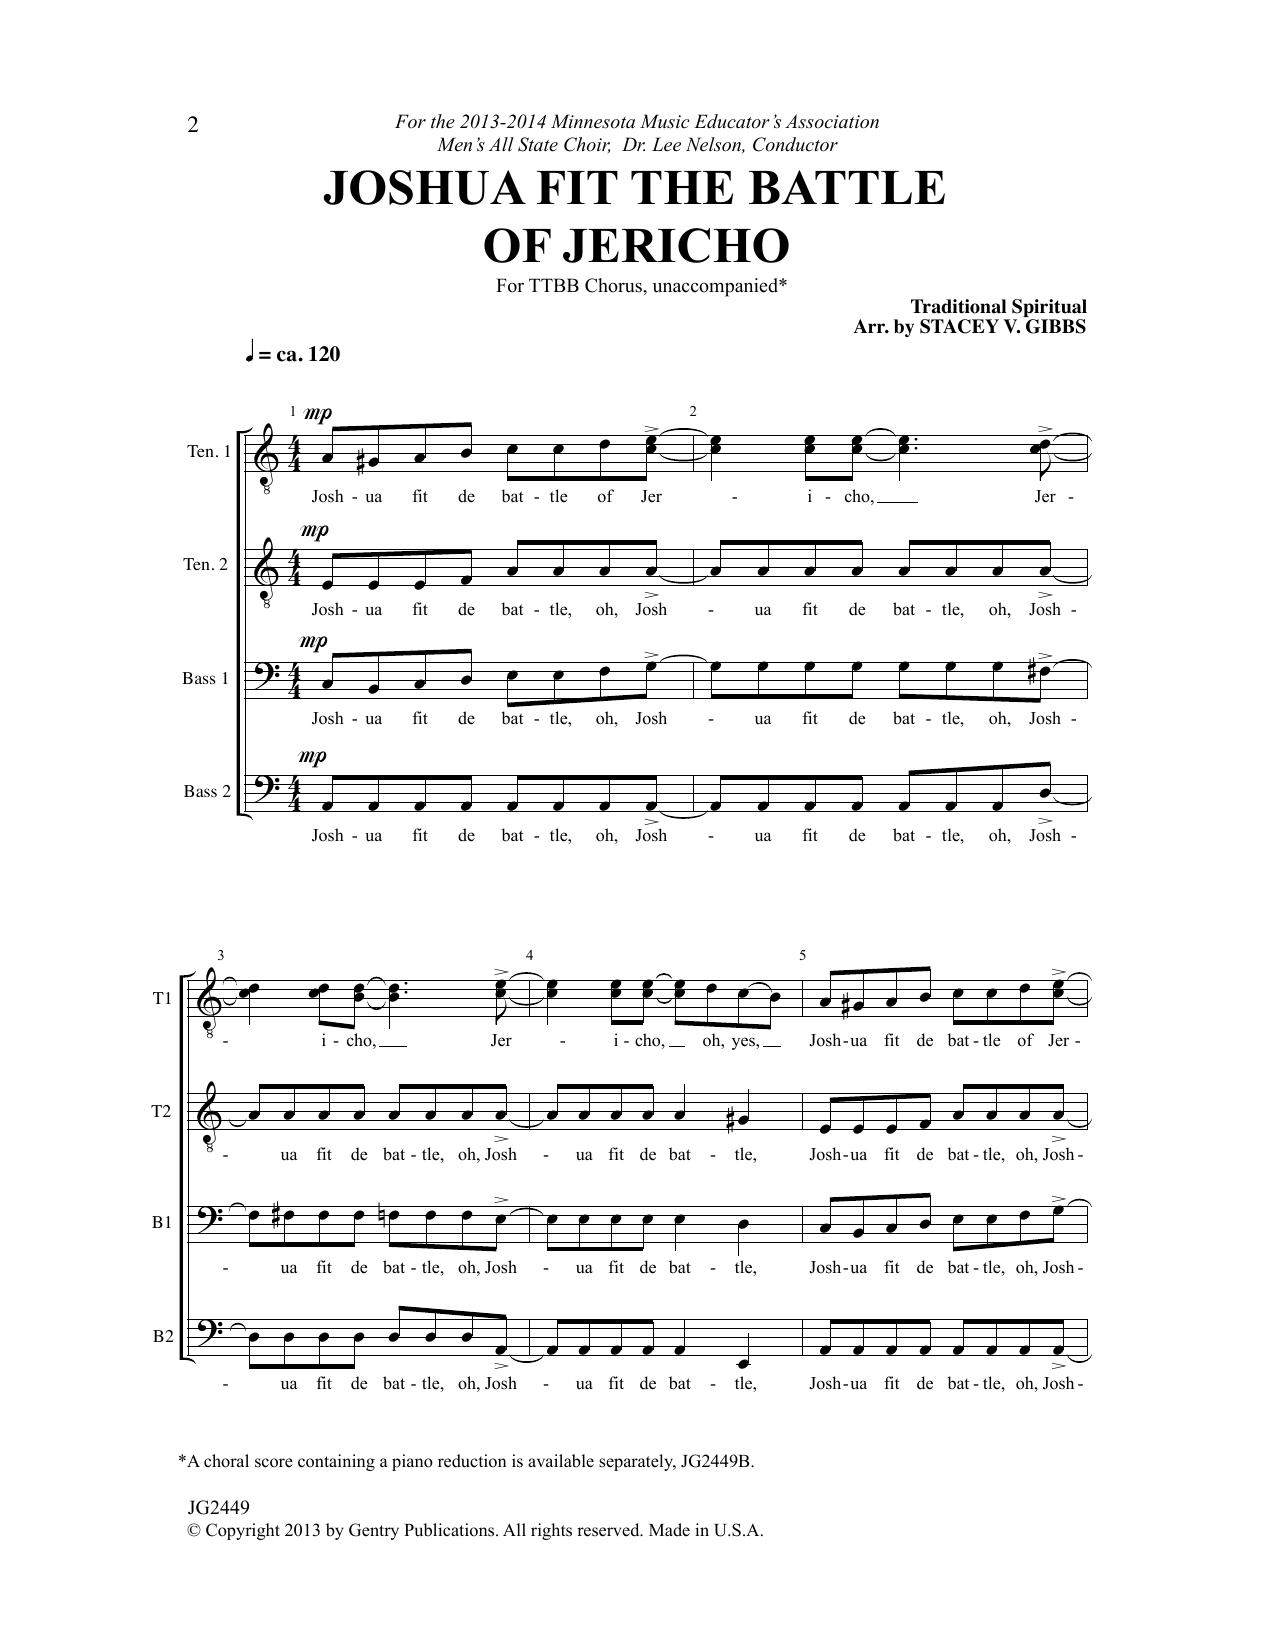 Download Traditional Spiritual Joshua Fit The Battle Of Jericho (arr. Sheet Music